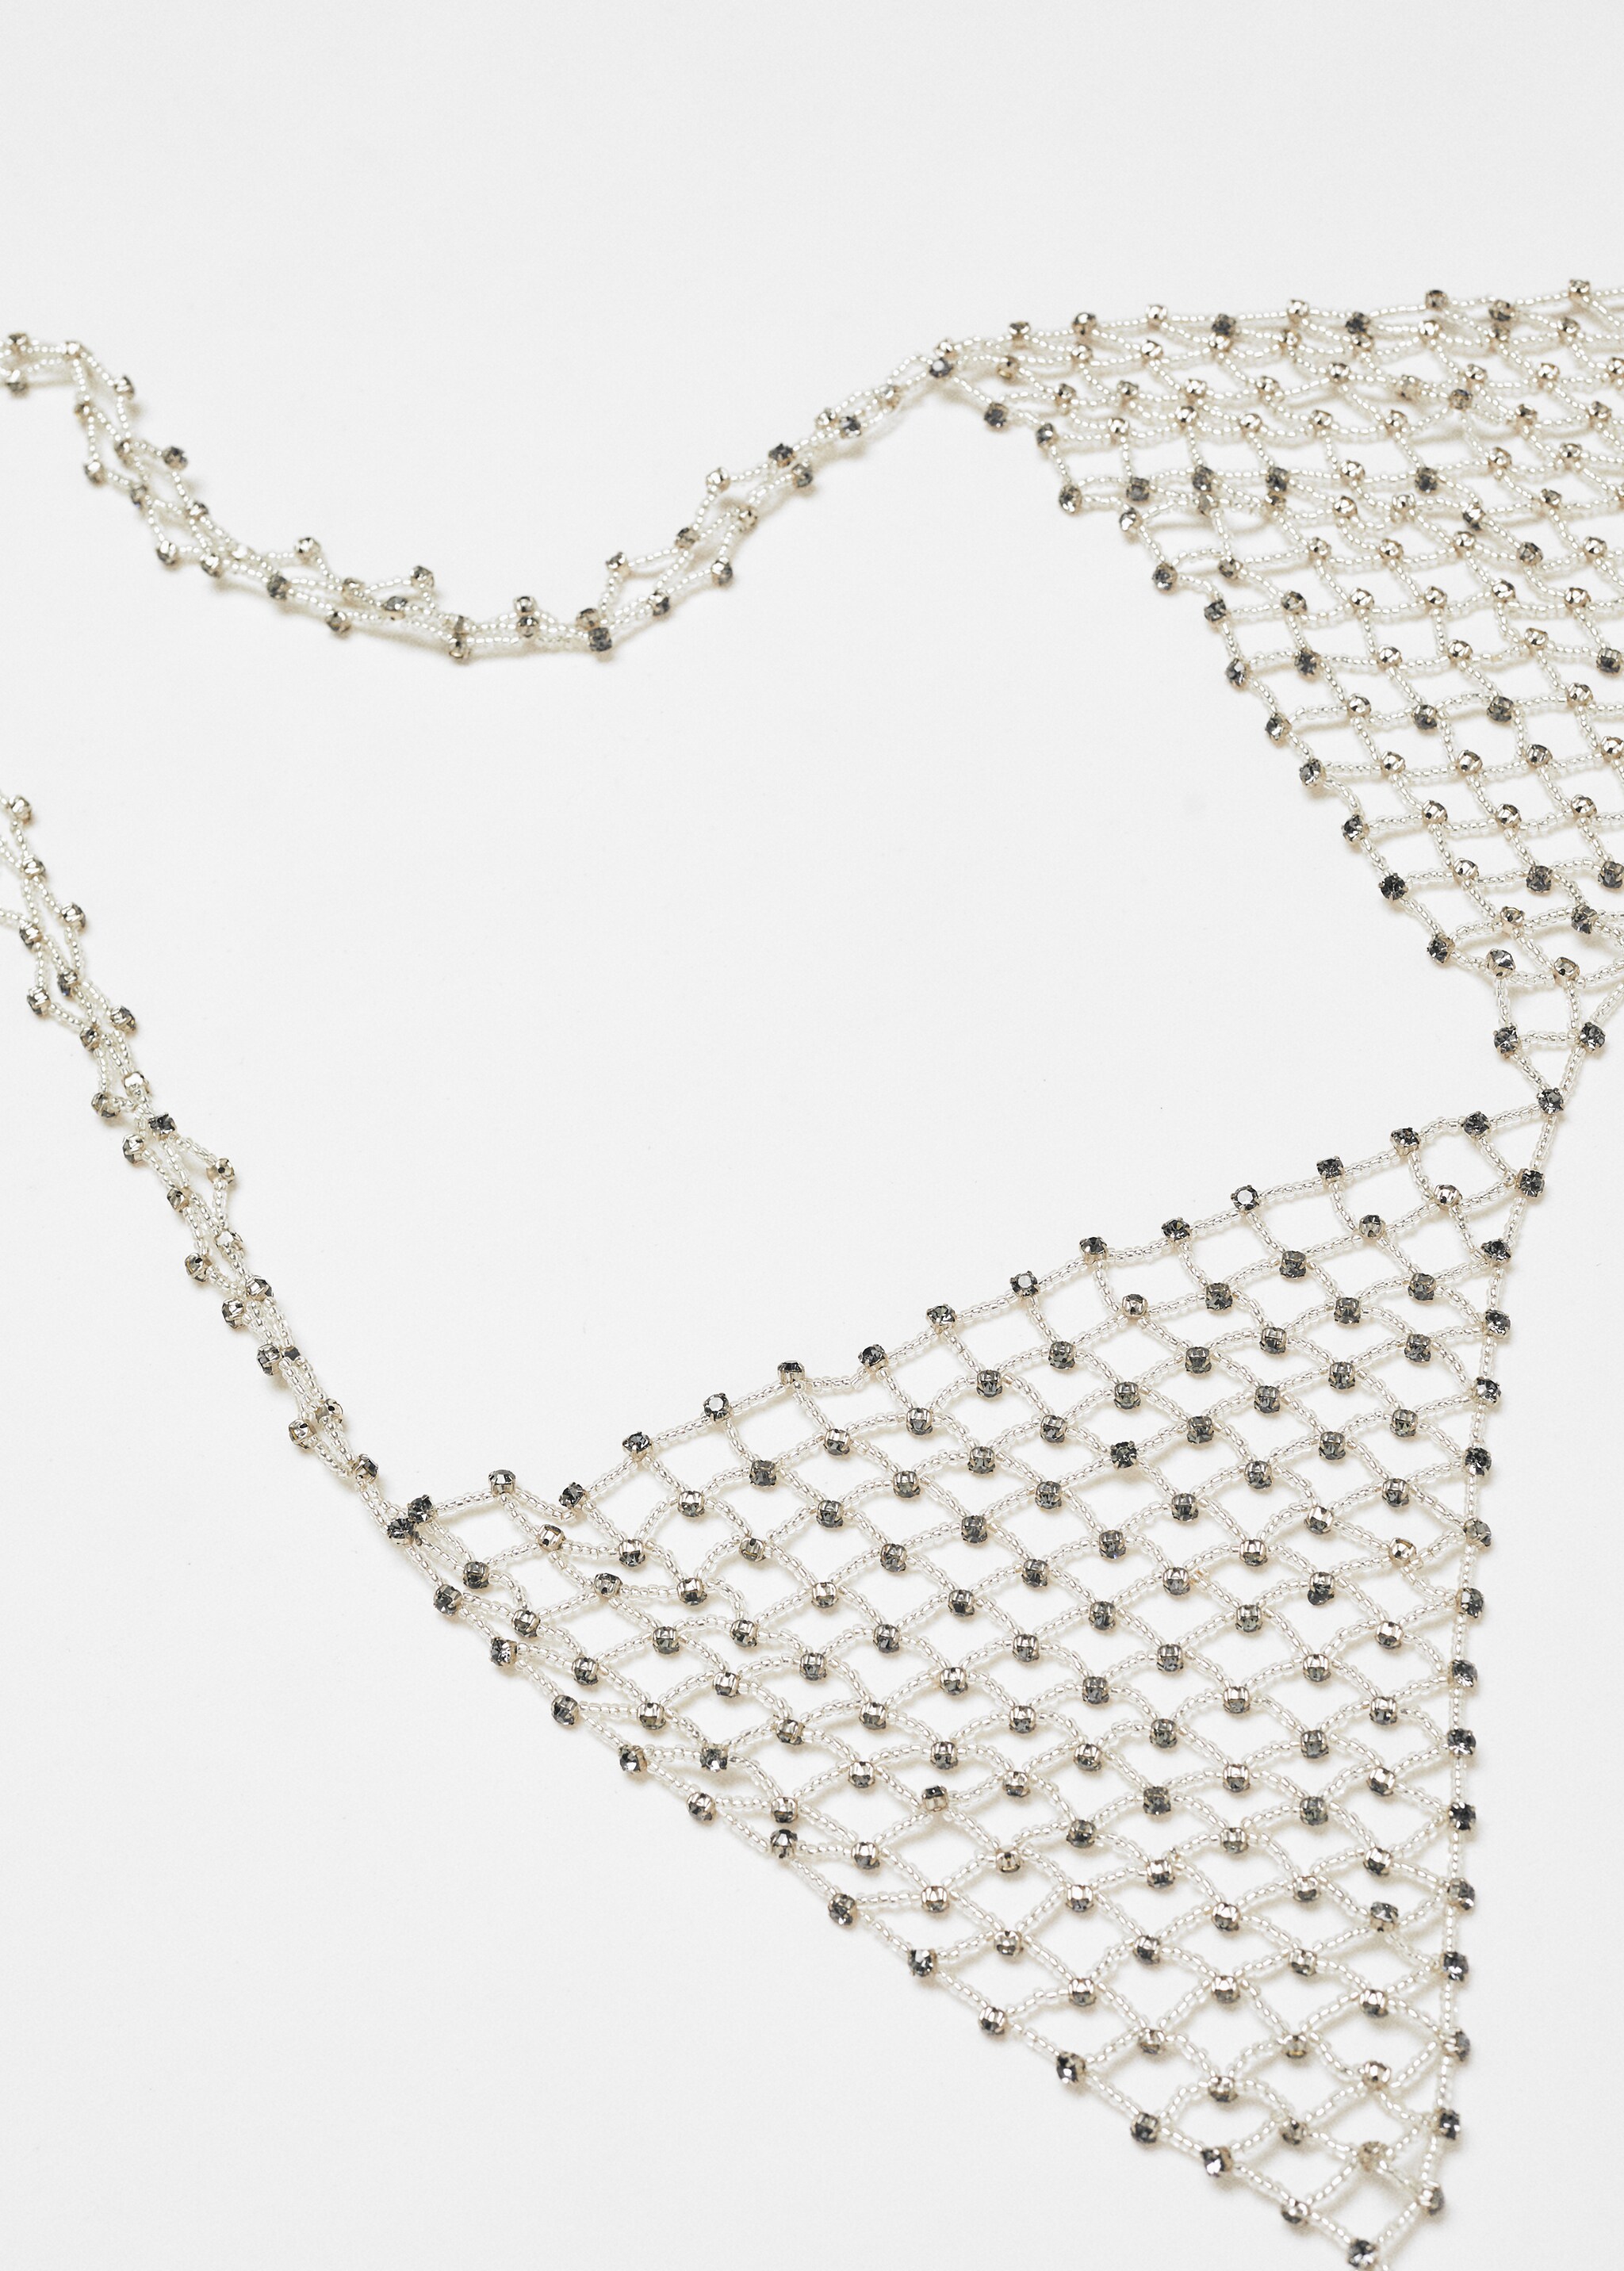 Rhinestone crystal body necklace - Details of the article 1